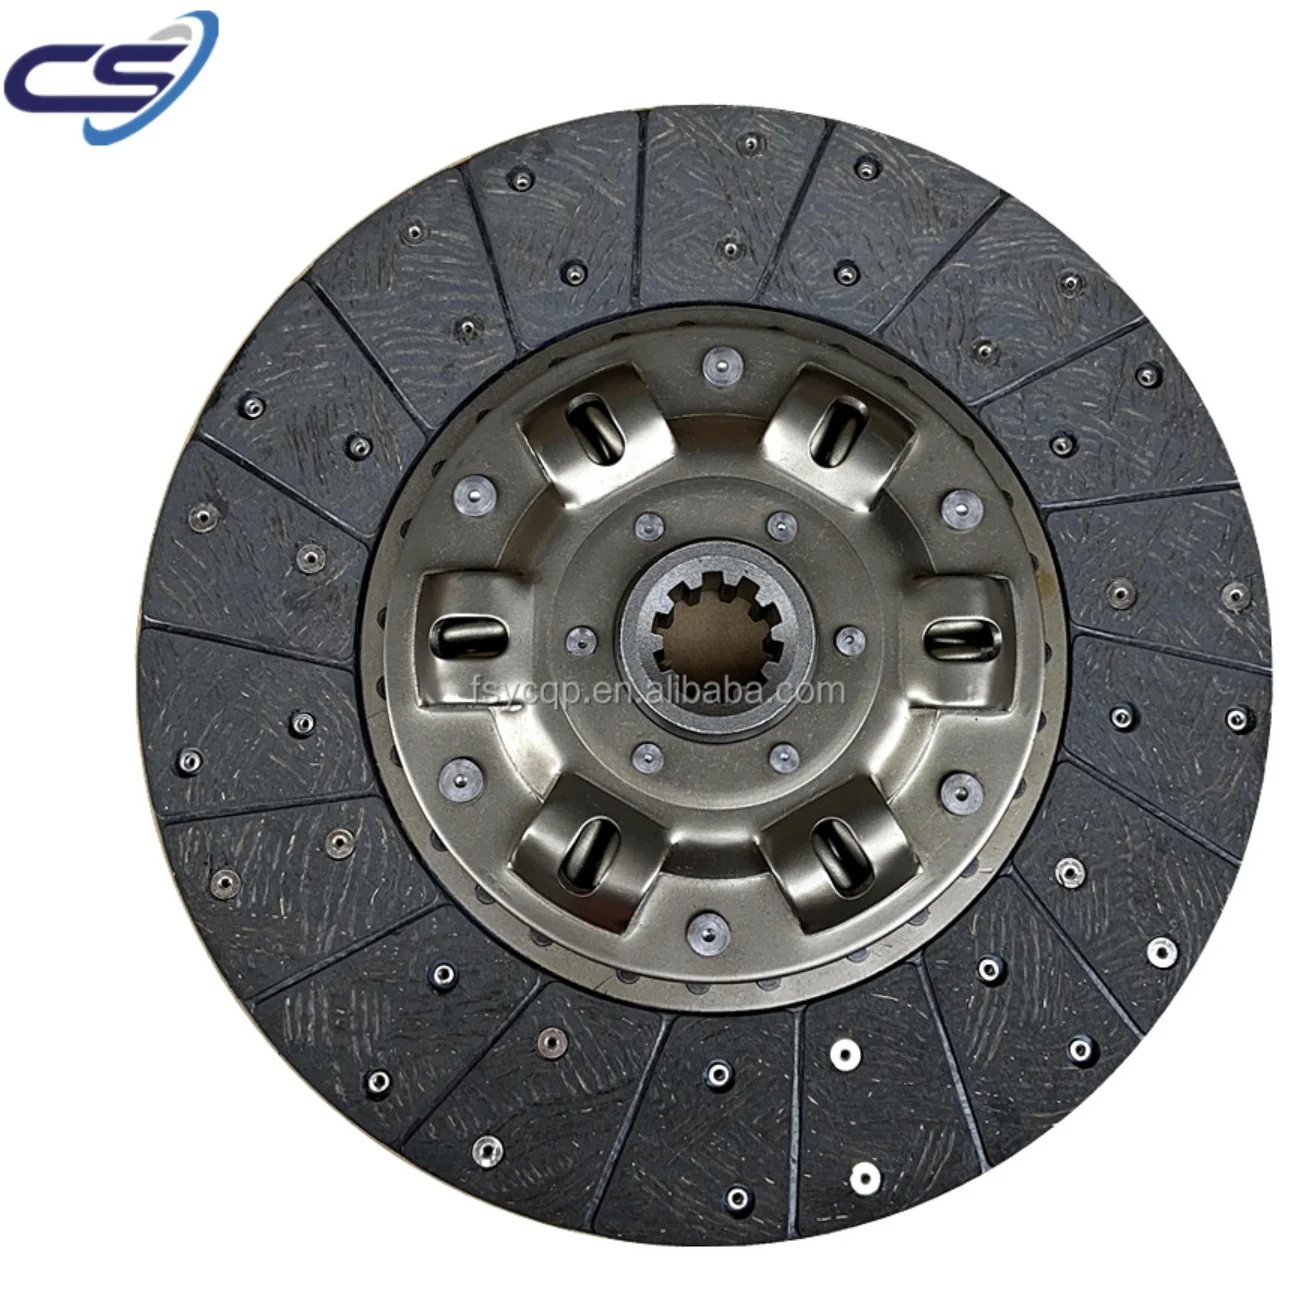 1-31240-515-0 1-31240515-0 ISD036D CLUTCH DISC FOR 6HH1 6HE1 DA120 JAPANESE TRUCK PARTS cover original supplier japanese truck 380mm clutch assembly for 1993 2003 6he1 t